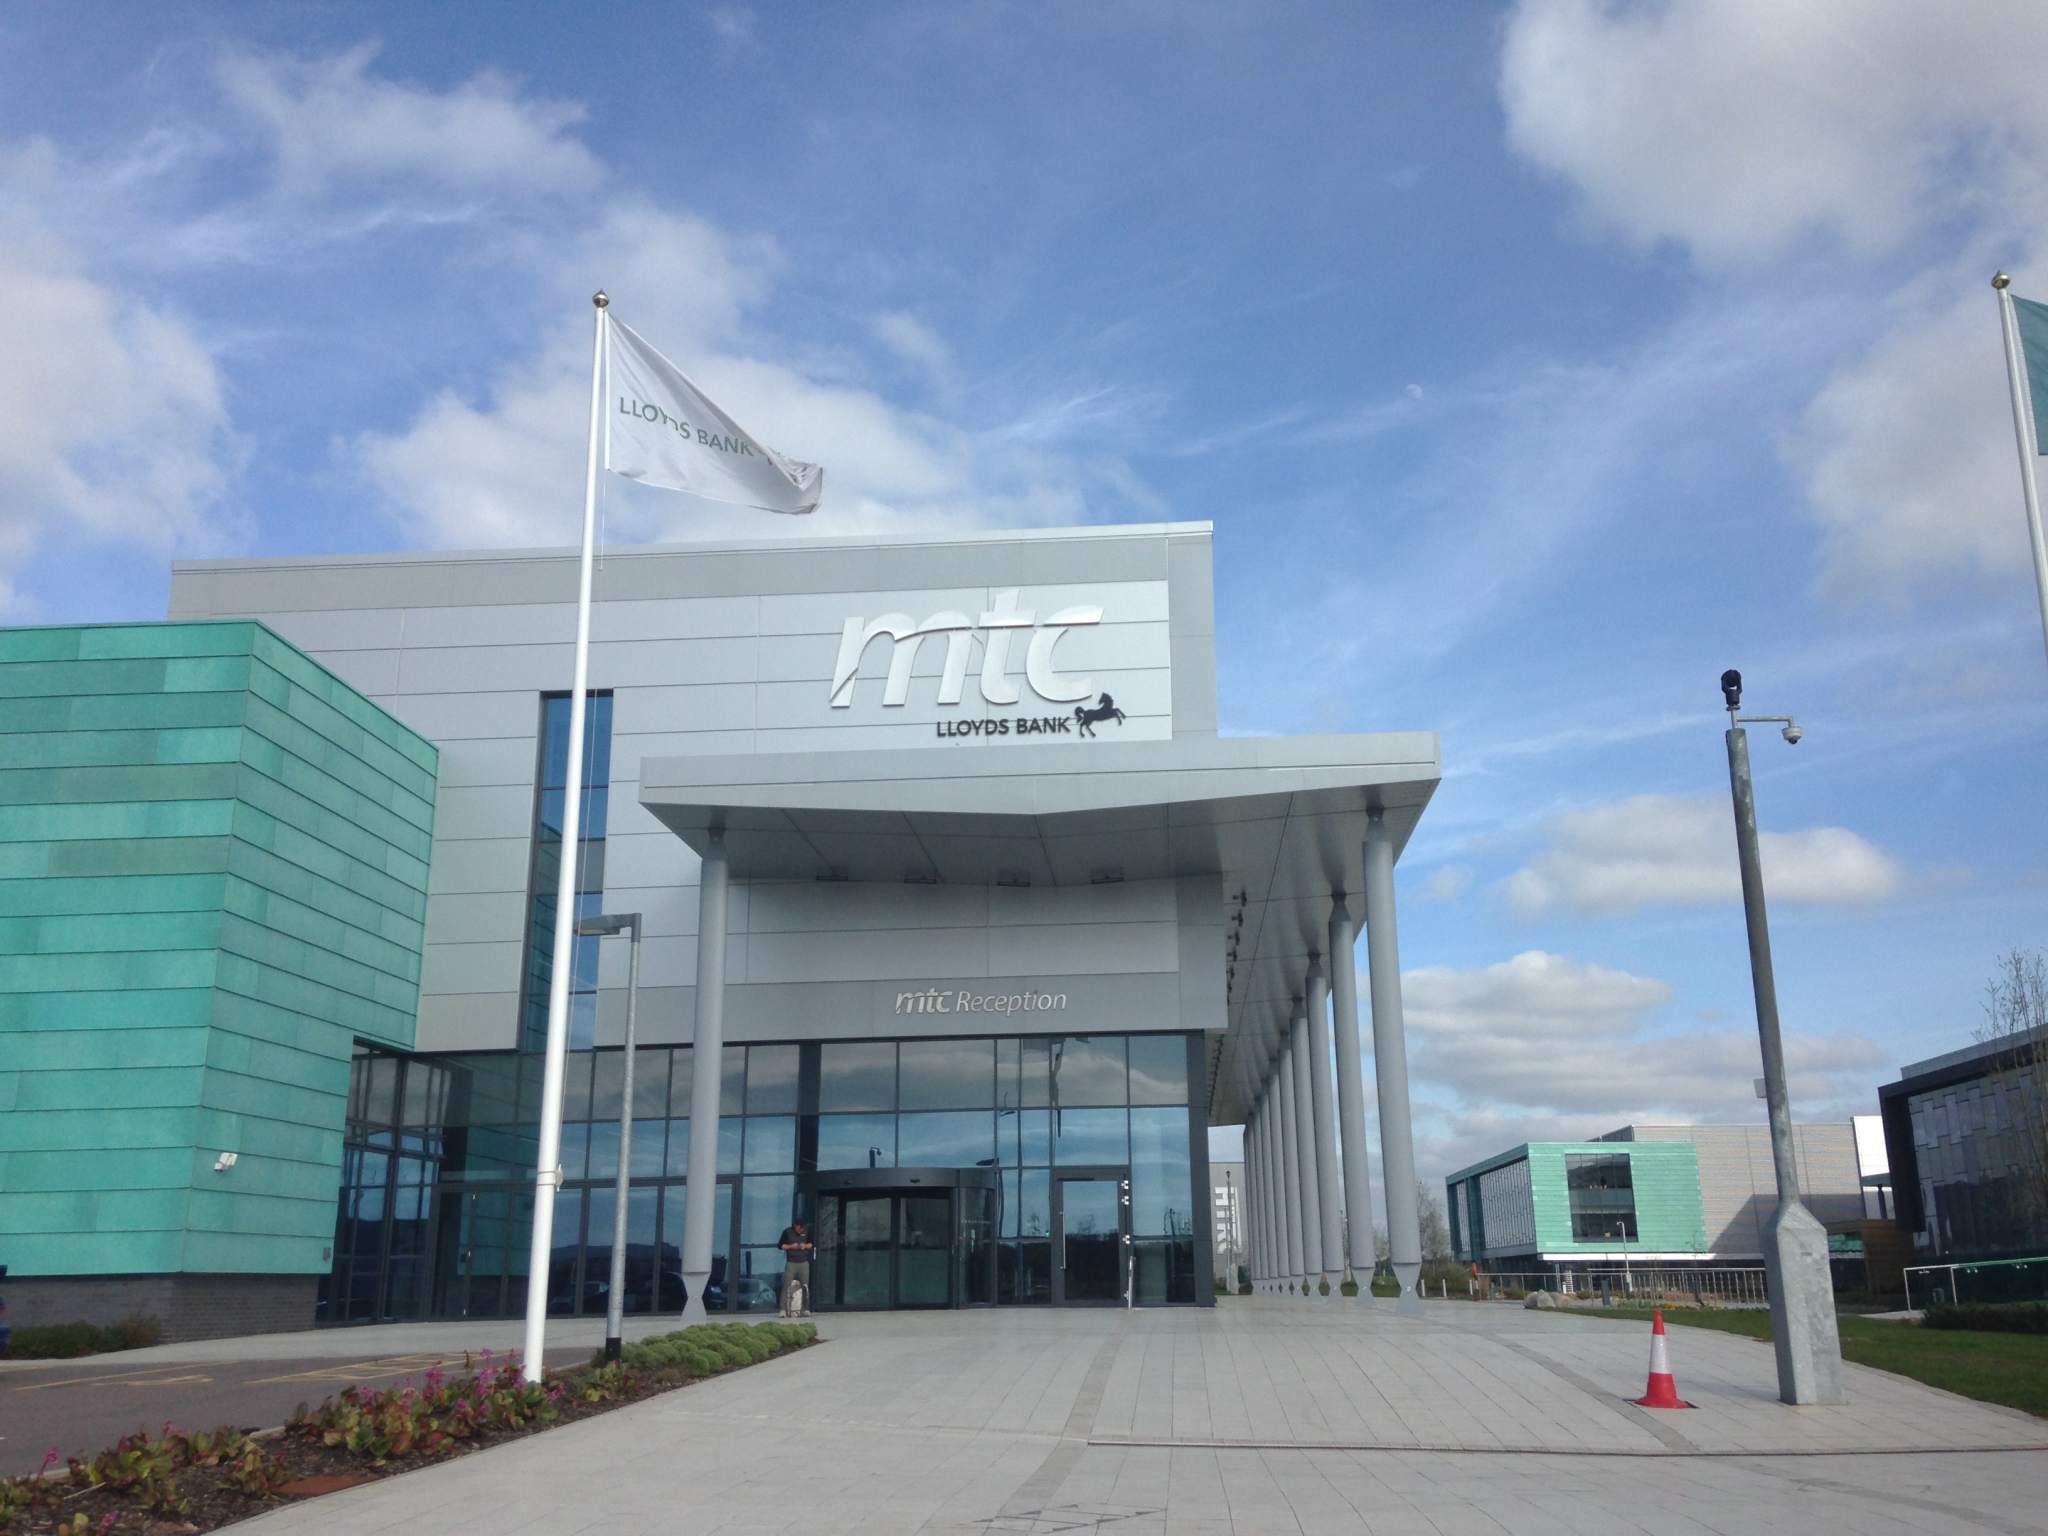 Venue for the UKIEF: Lloyds Bank Advanced Manufacturing Training Centre (AMTC) in Coventry, UK. Photo by Beau Jackson